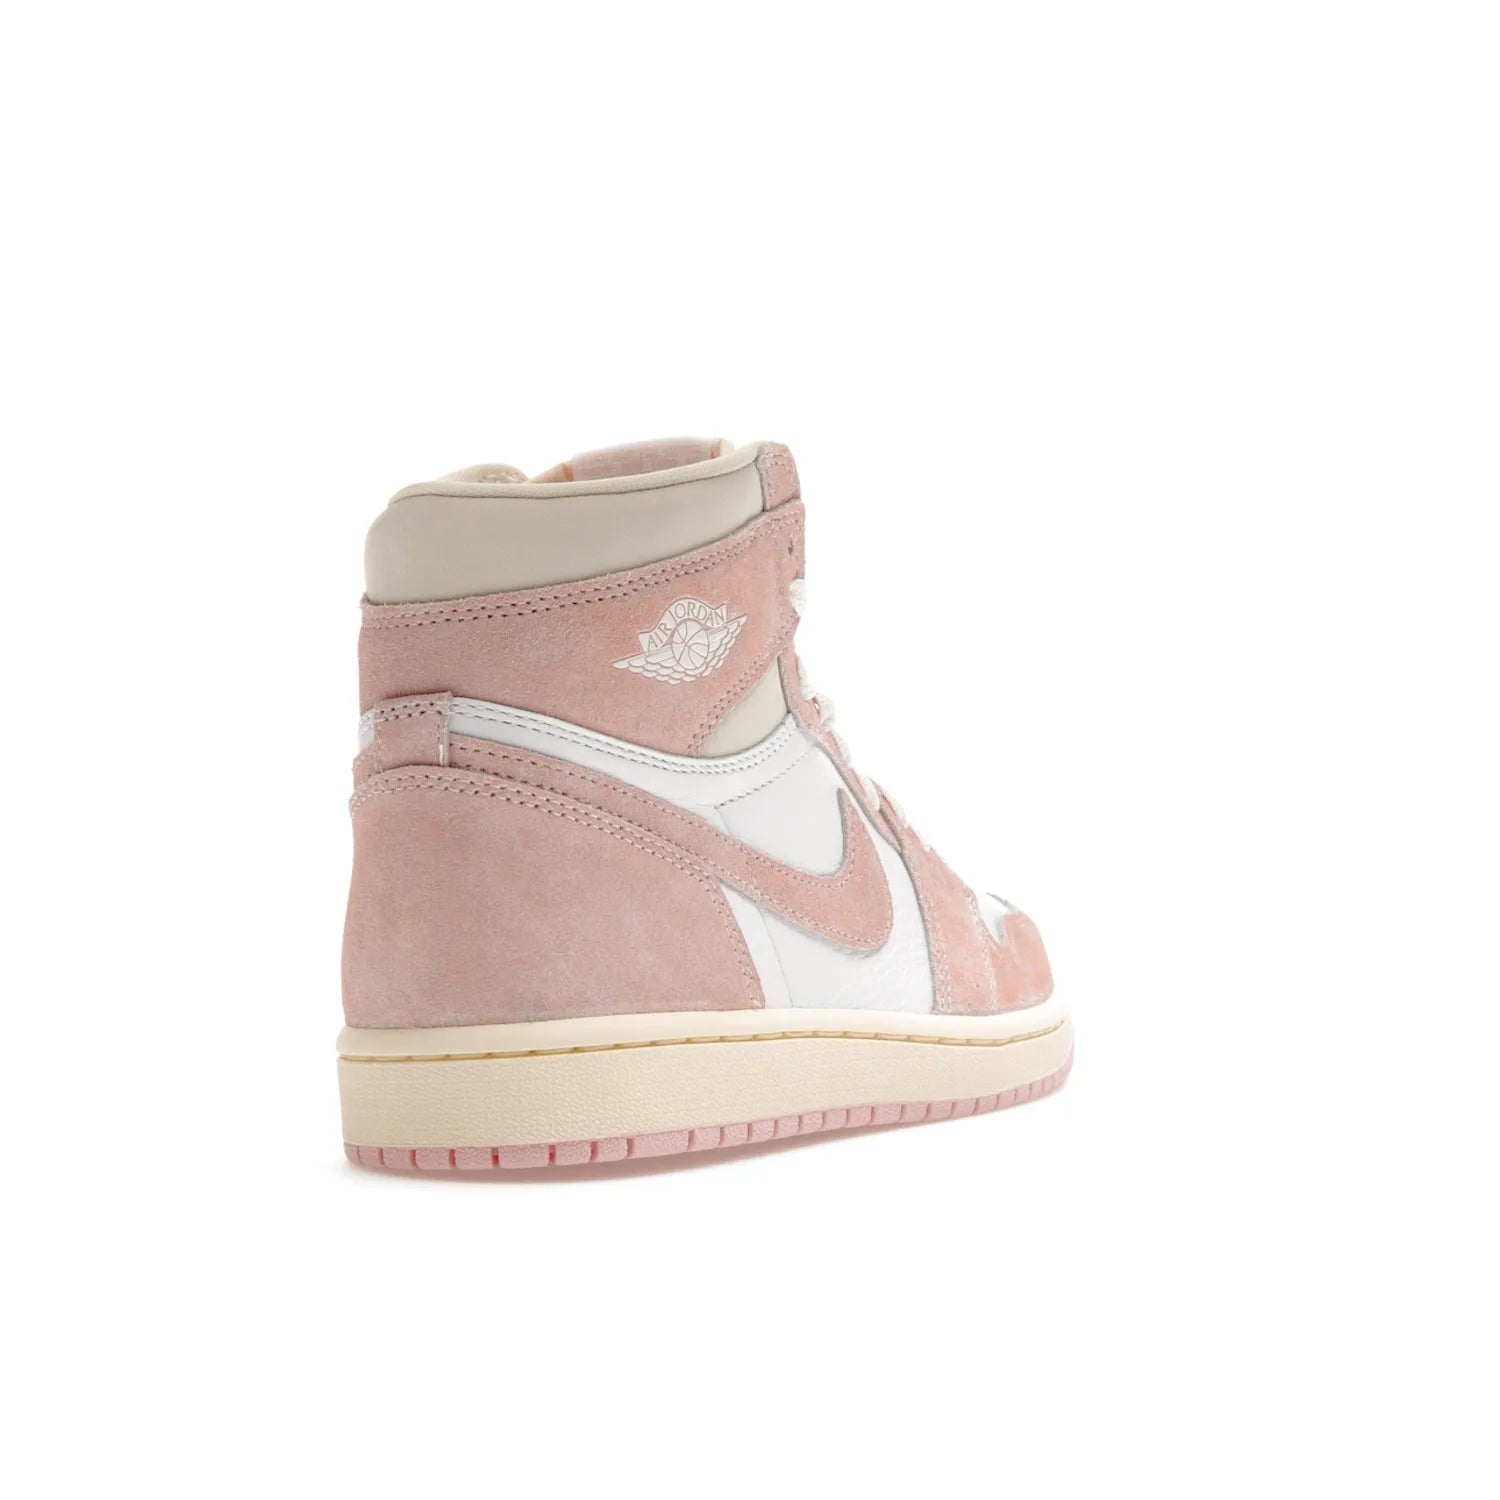 Jordan 1 Retro High OG Washed Pink (Women's) - Image 31 - Only at www.BallersClubKickz.com - Iconic Air Jordan 1 Retro High OG for women with unique pink suede and white leather uppers. Get the timeless look on April 22, 2023.